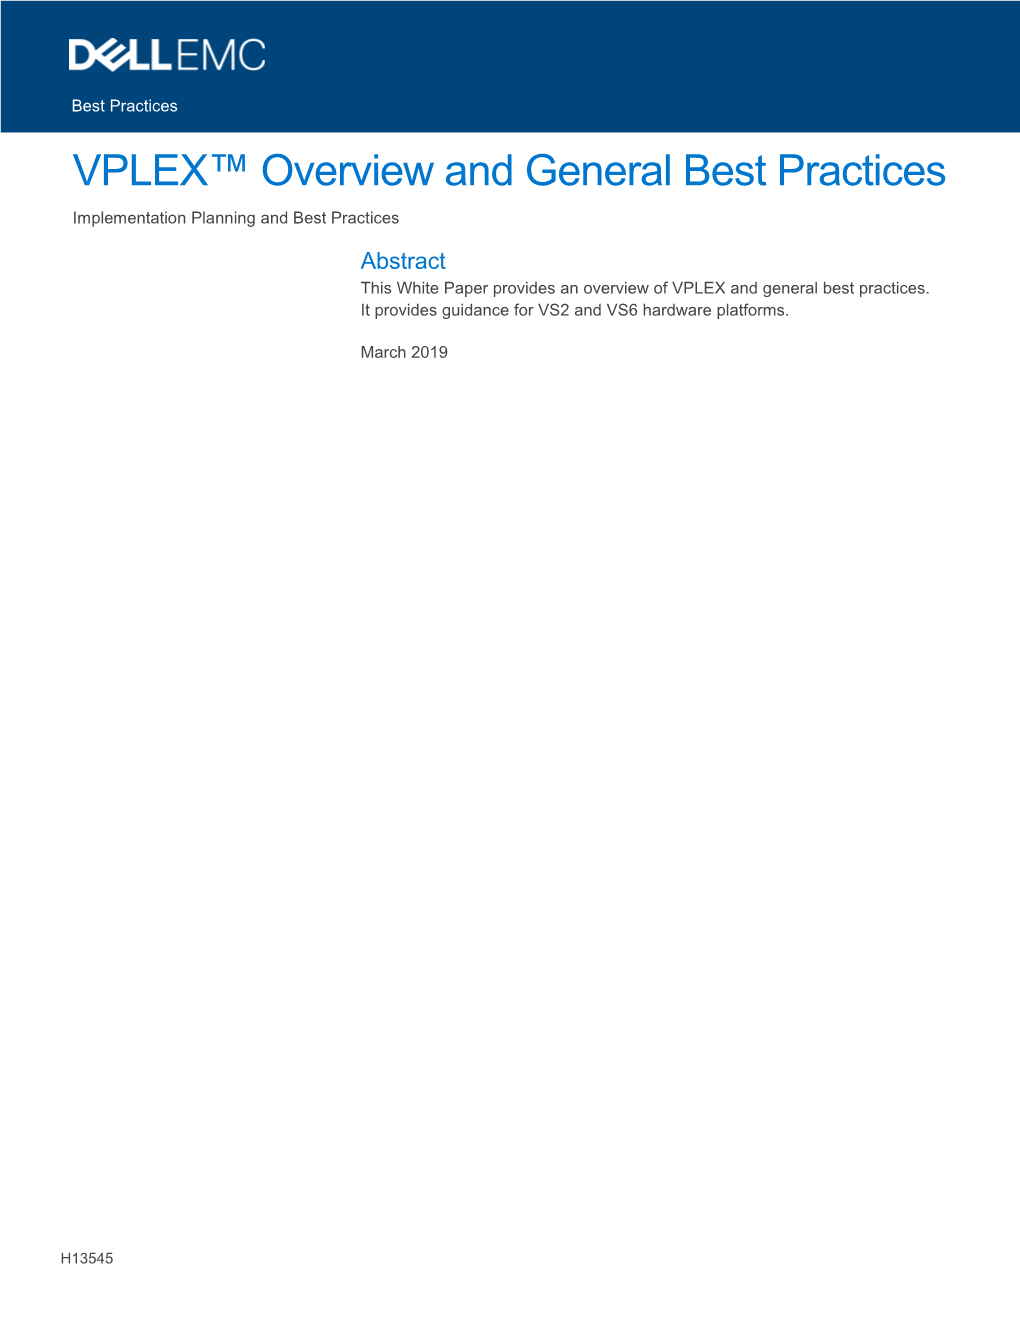 VPLEX™ Overview and General Best Practices Implementation Planning and Best Practices